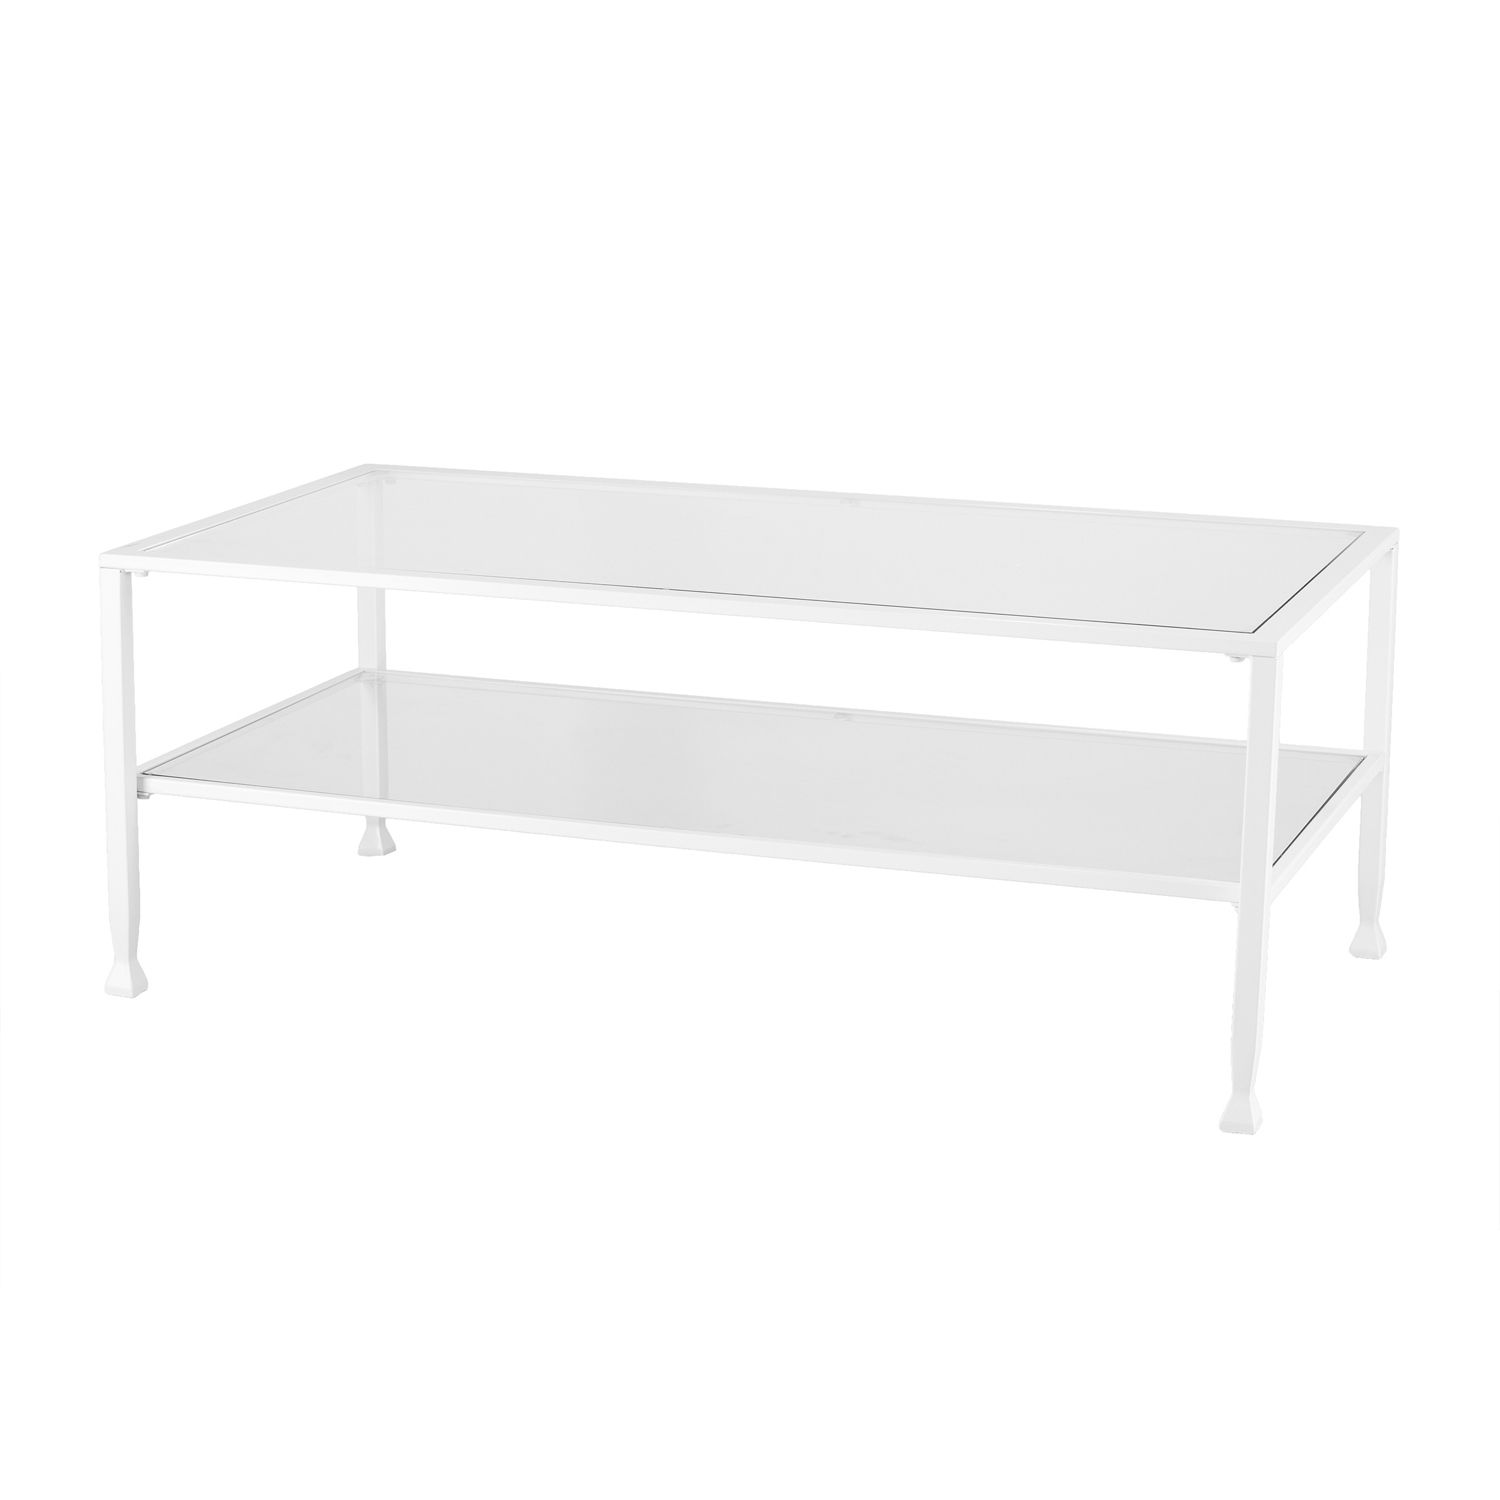 Newest Metal 1 Shelf Coffee Tables Intended For Kathryn White Metal Open Shelf Coffee Table – Pier (View 3 of 15)